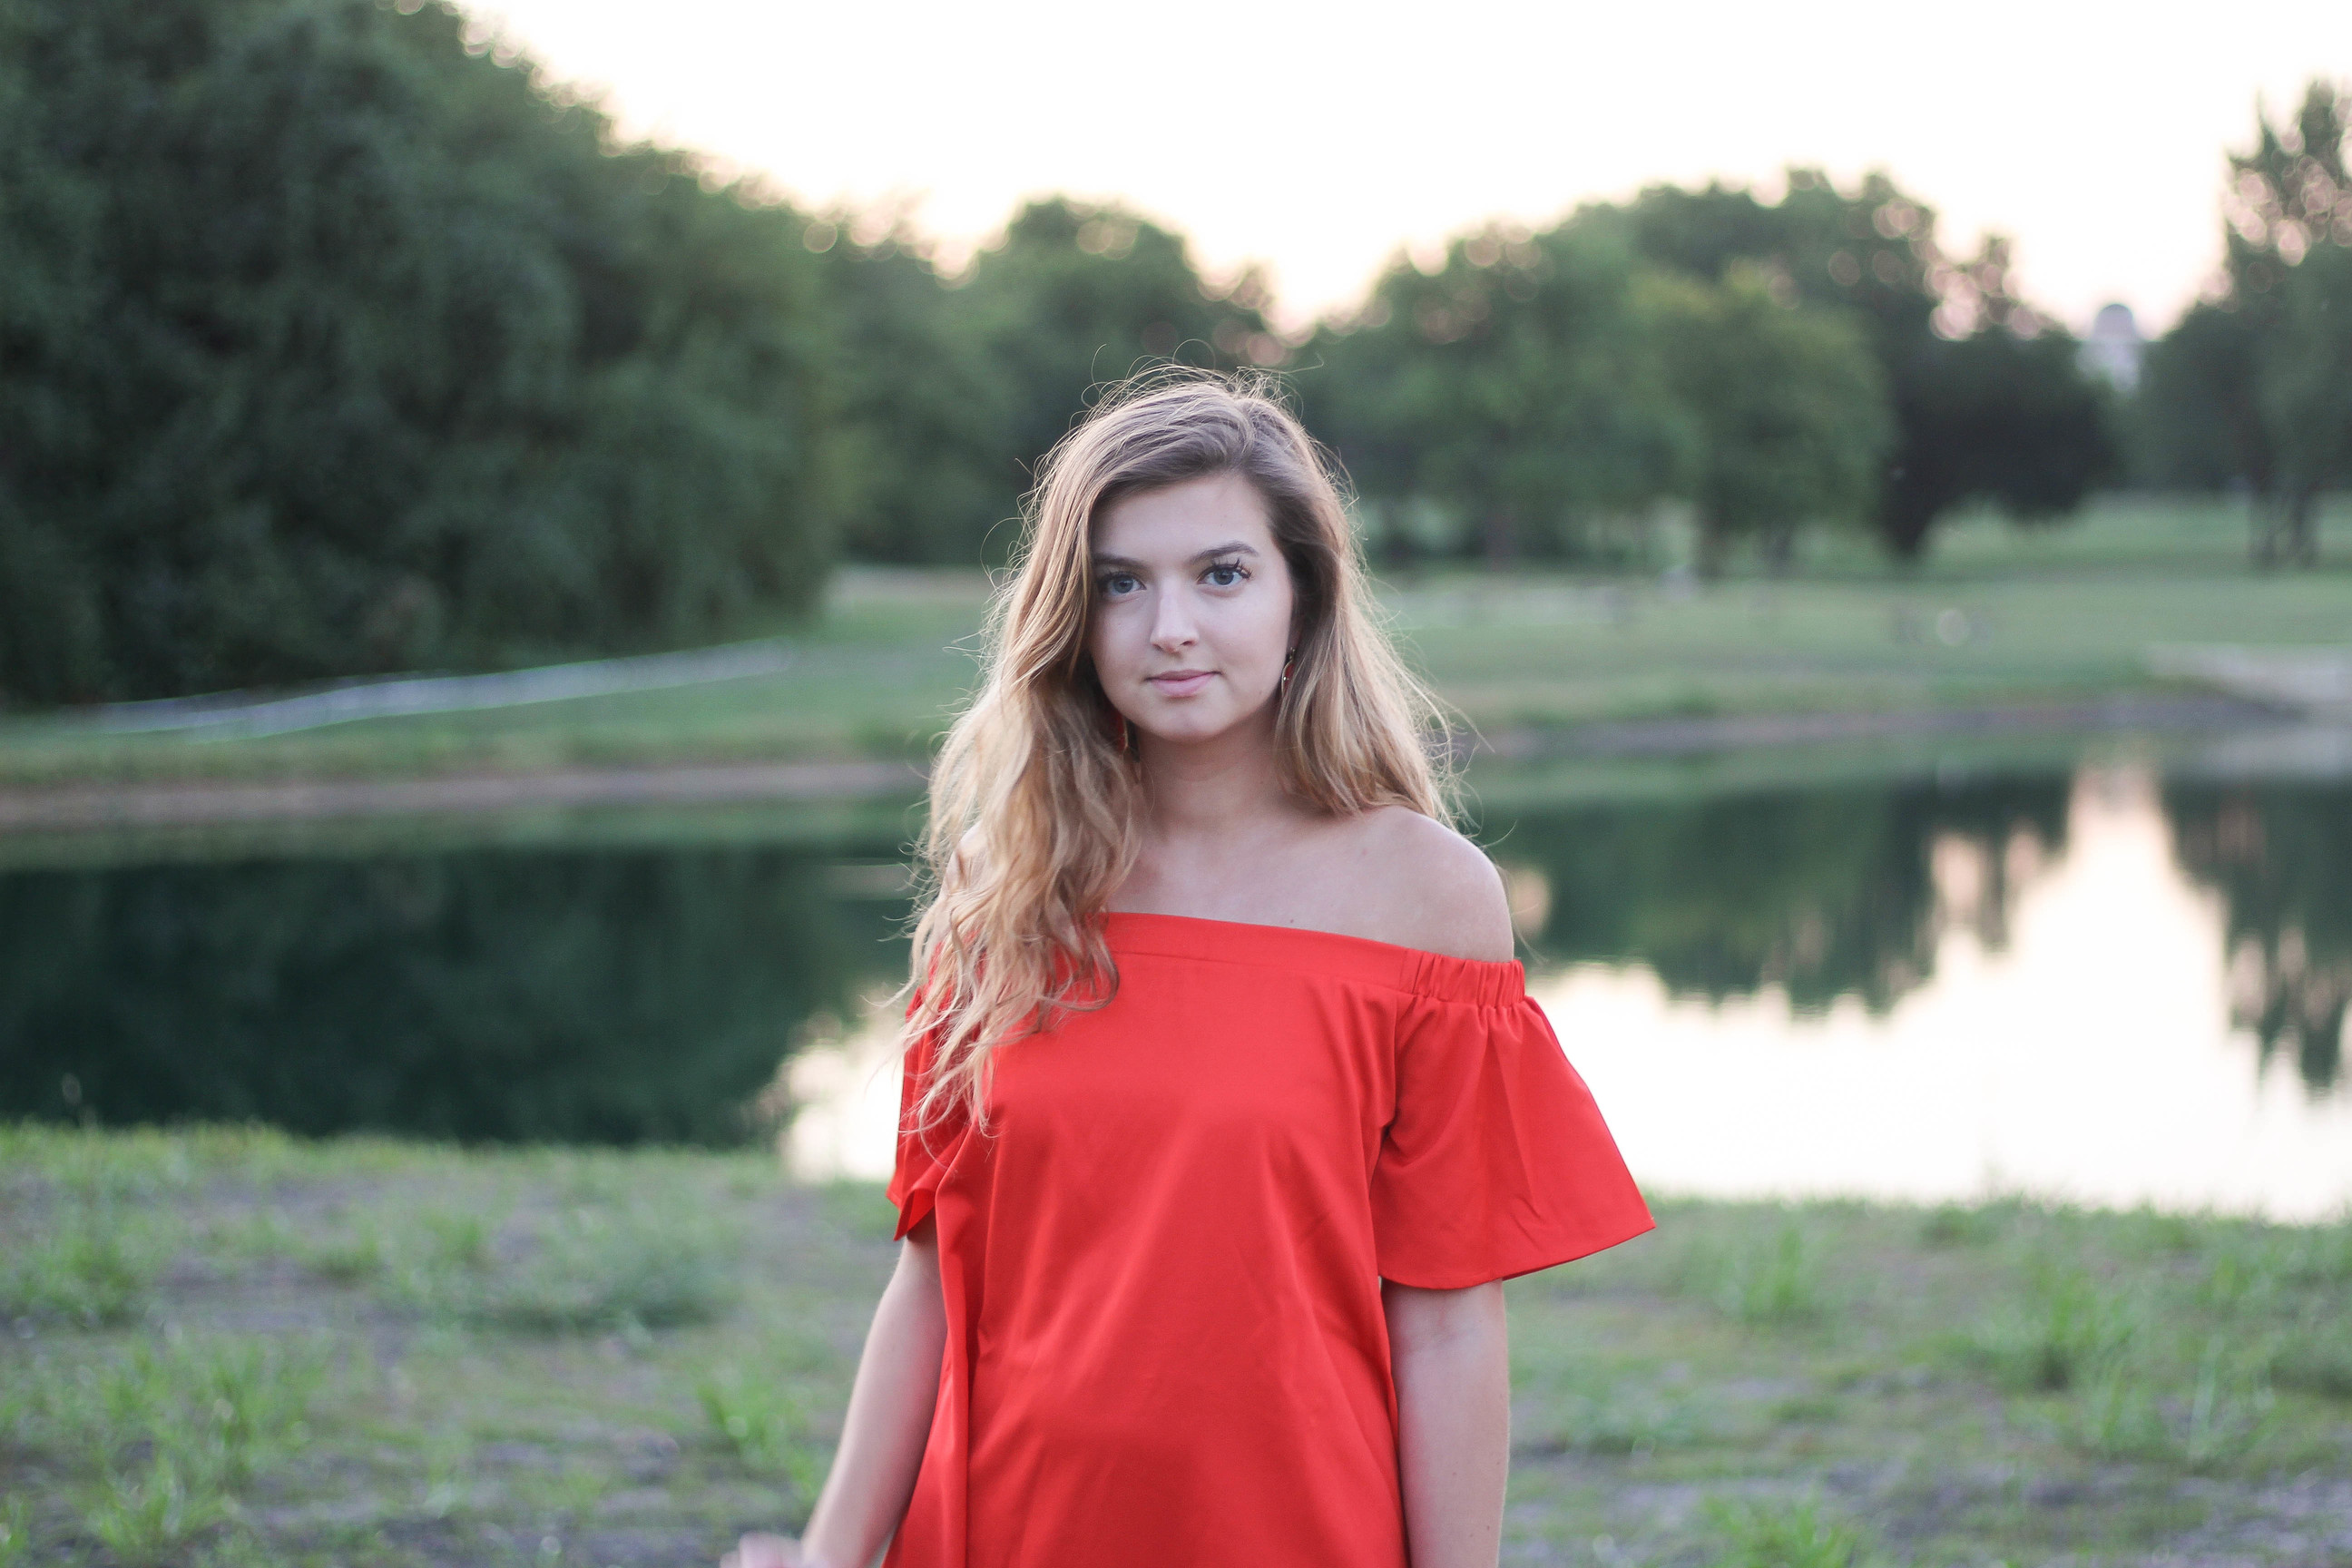 Off the shoulder red dress from Romwe by lauren lindmark on daily dose of charm